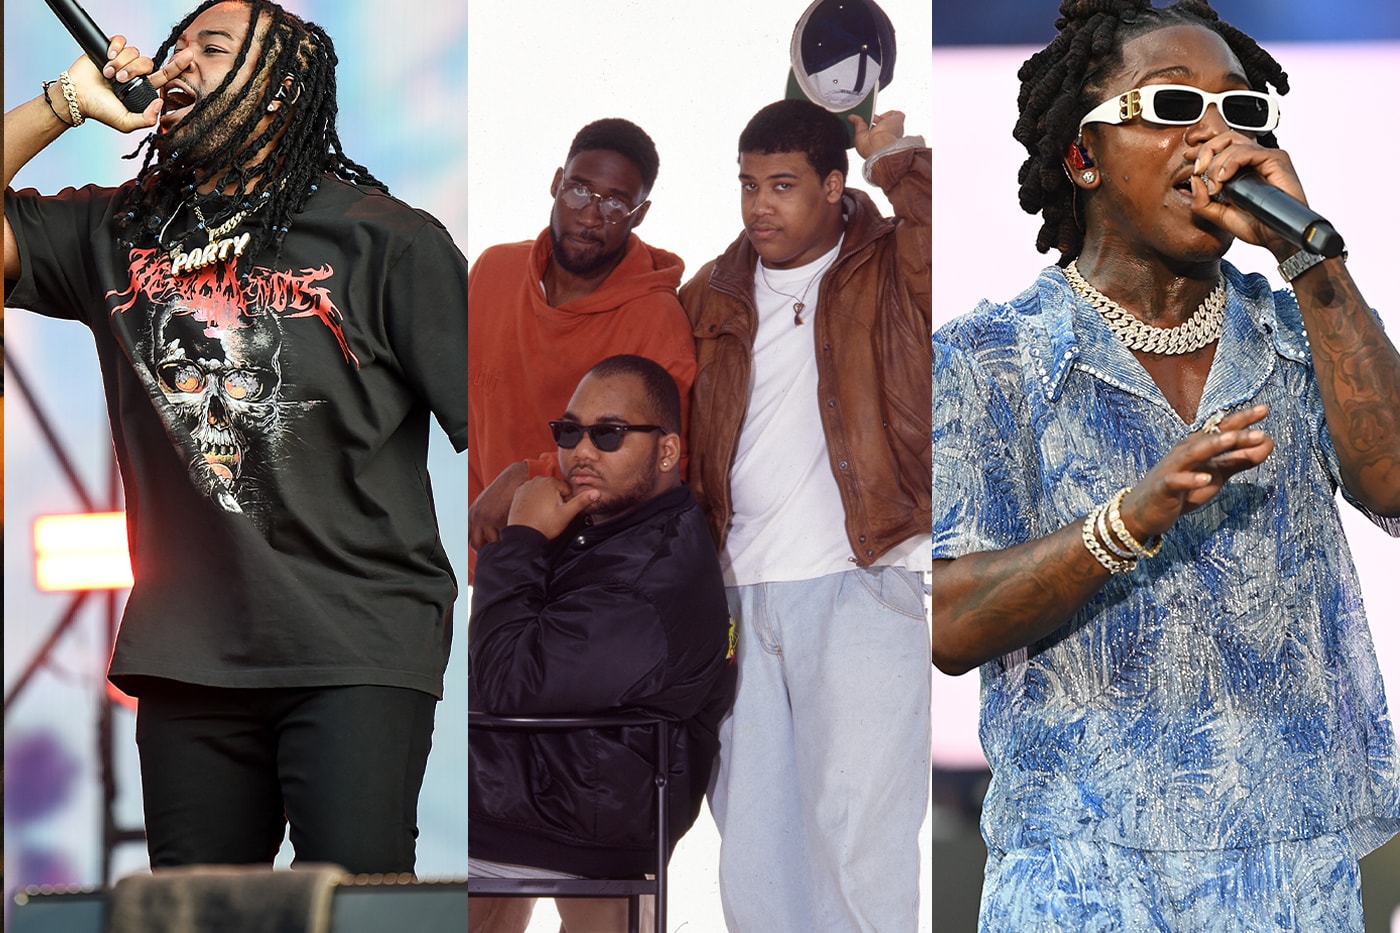 Best New Tracks De La Soul partynextdoor jacquees future fly anakin armani white denzel curry paramore benny sings kenny beats sg lewis miley cyrus charlotte day lewis channel tres